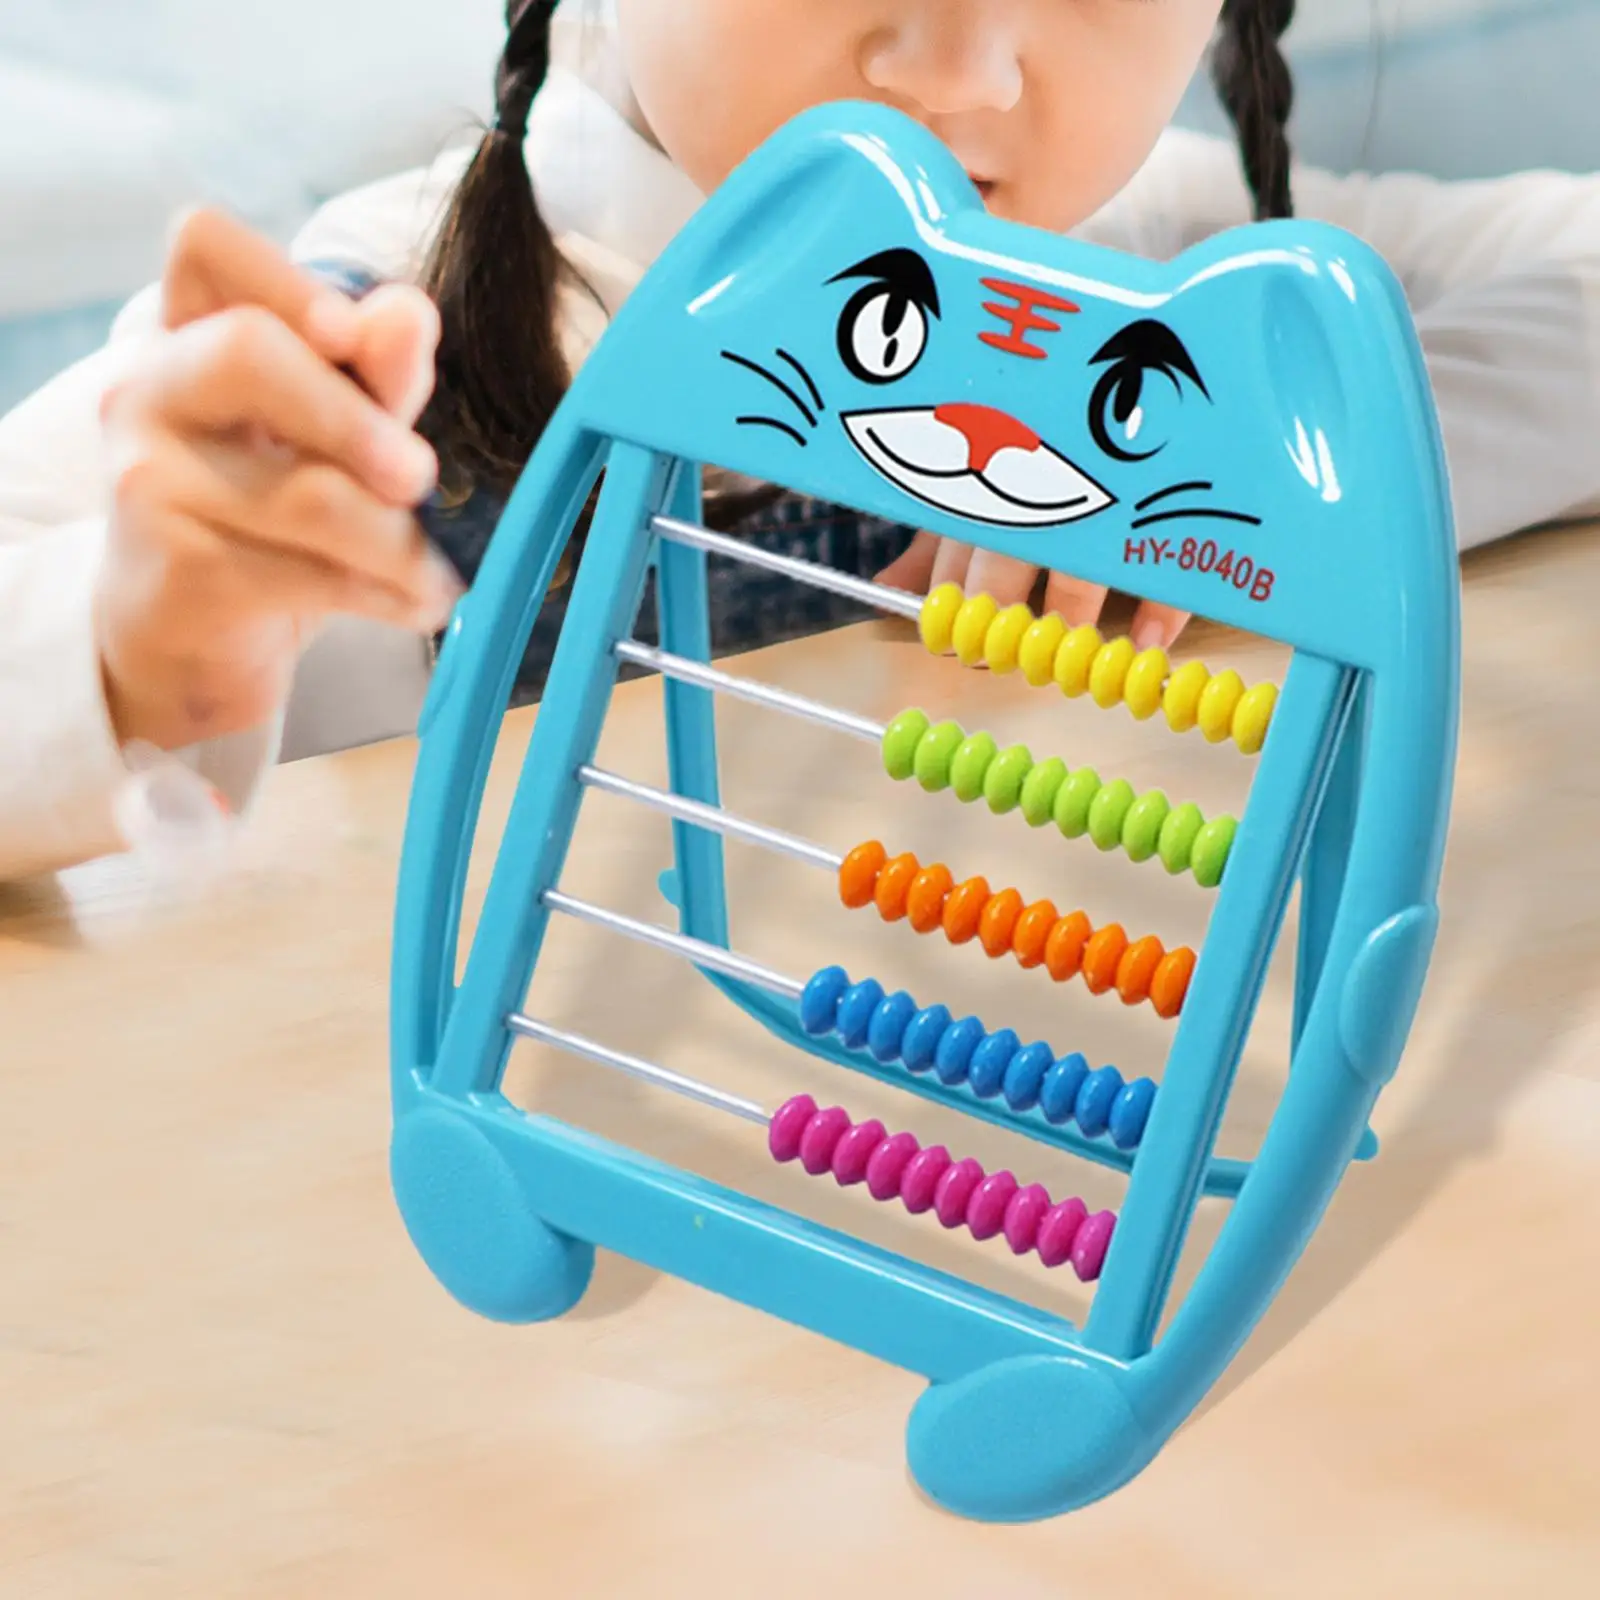 

Montessori Educational Abacus Math Manipulatives Educational Counting Frames Toy Math Learning Toy for Children Birthday Gifts